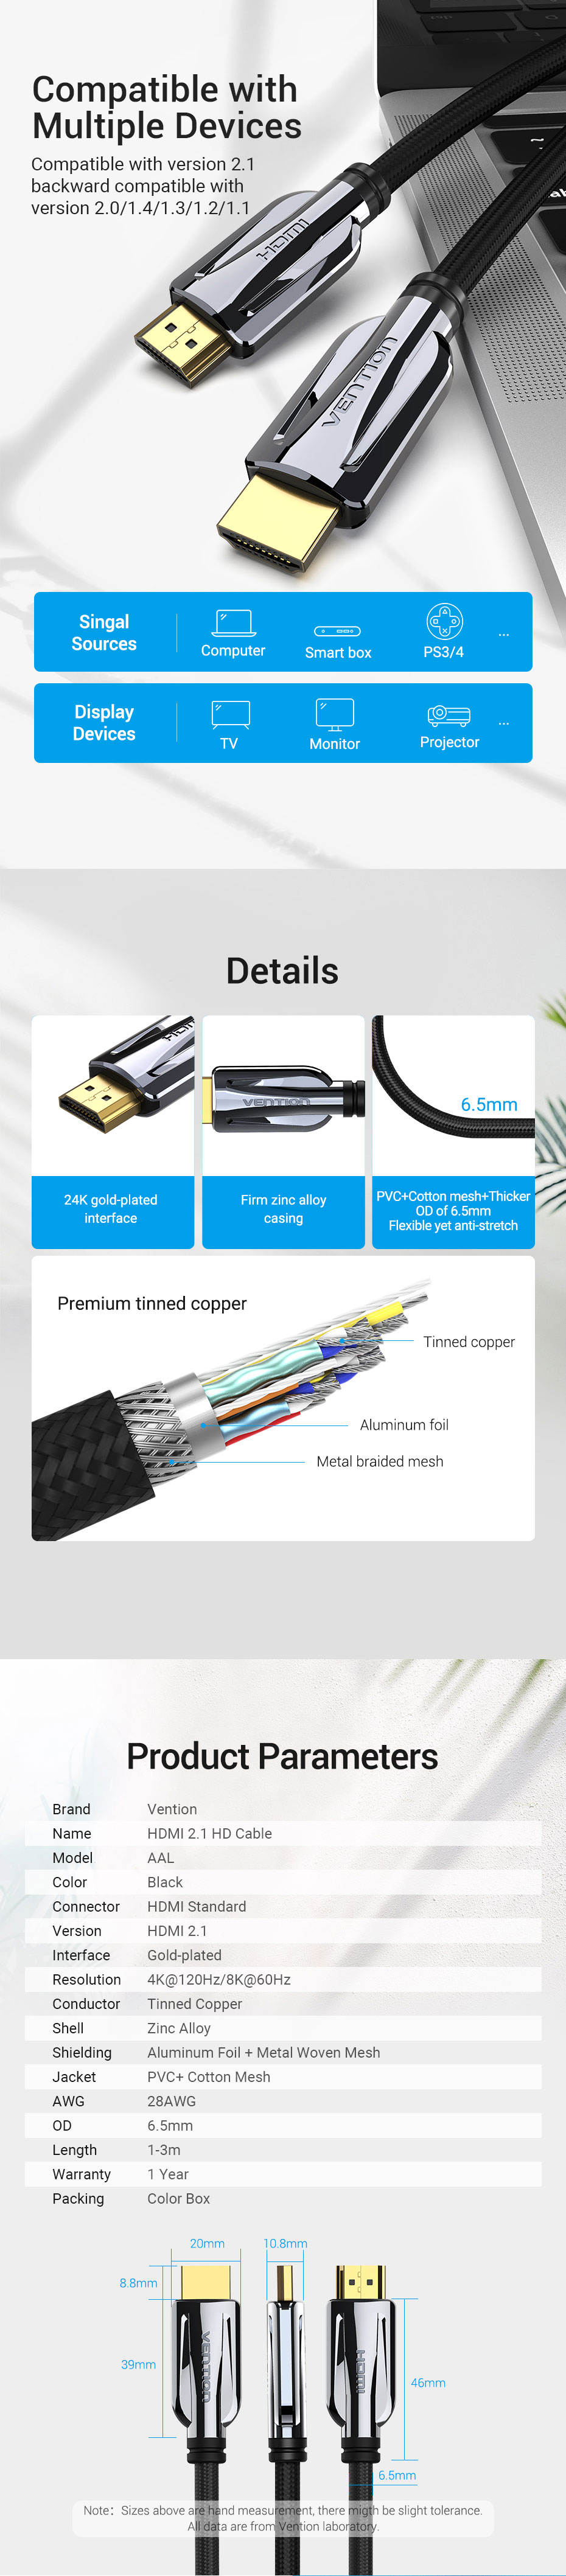 Vention HDMI 2.1 Cable 8K@60Hz High Speed 48Gbps HDMI Cable for Apple TV PS4 High Definition Multimedia Interface Cable HDMI